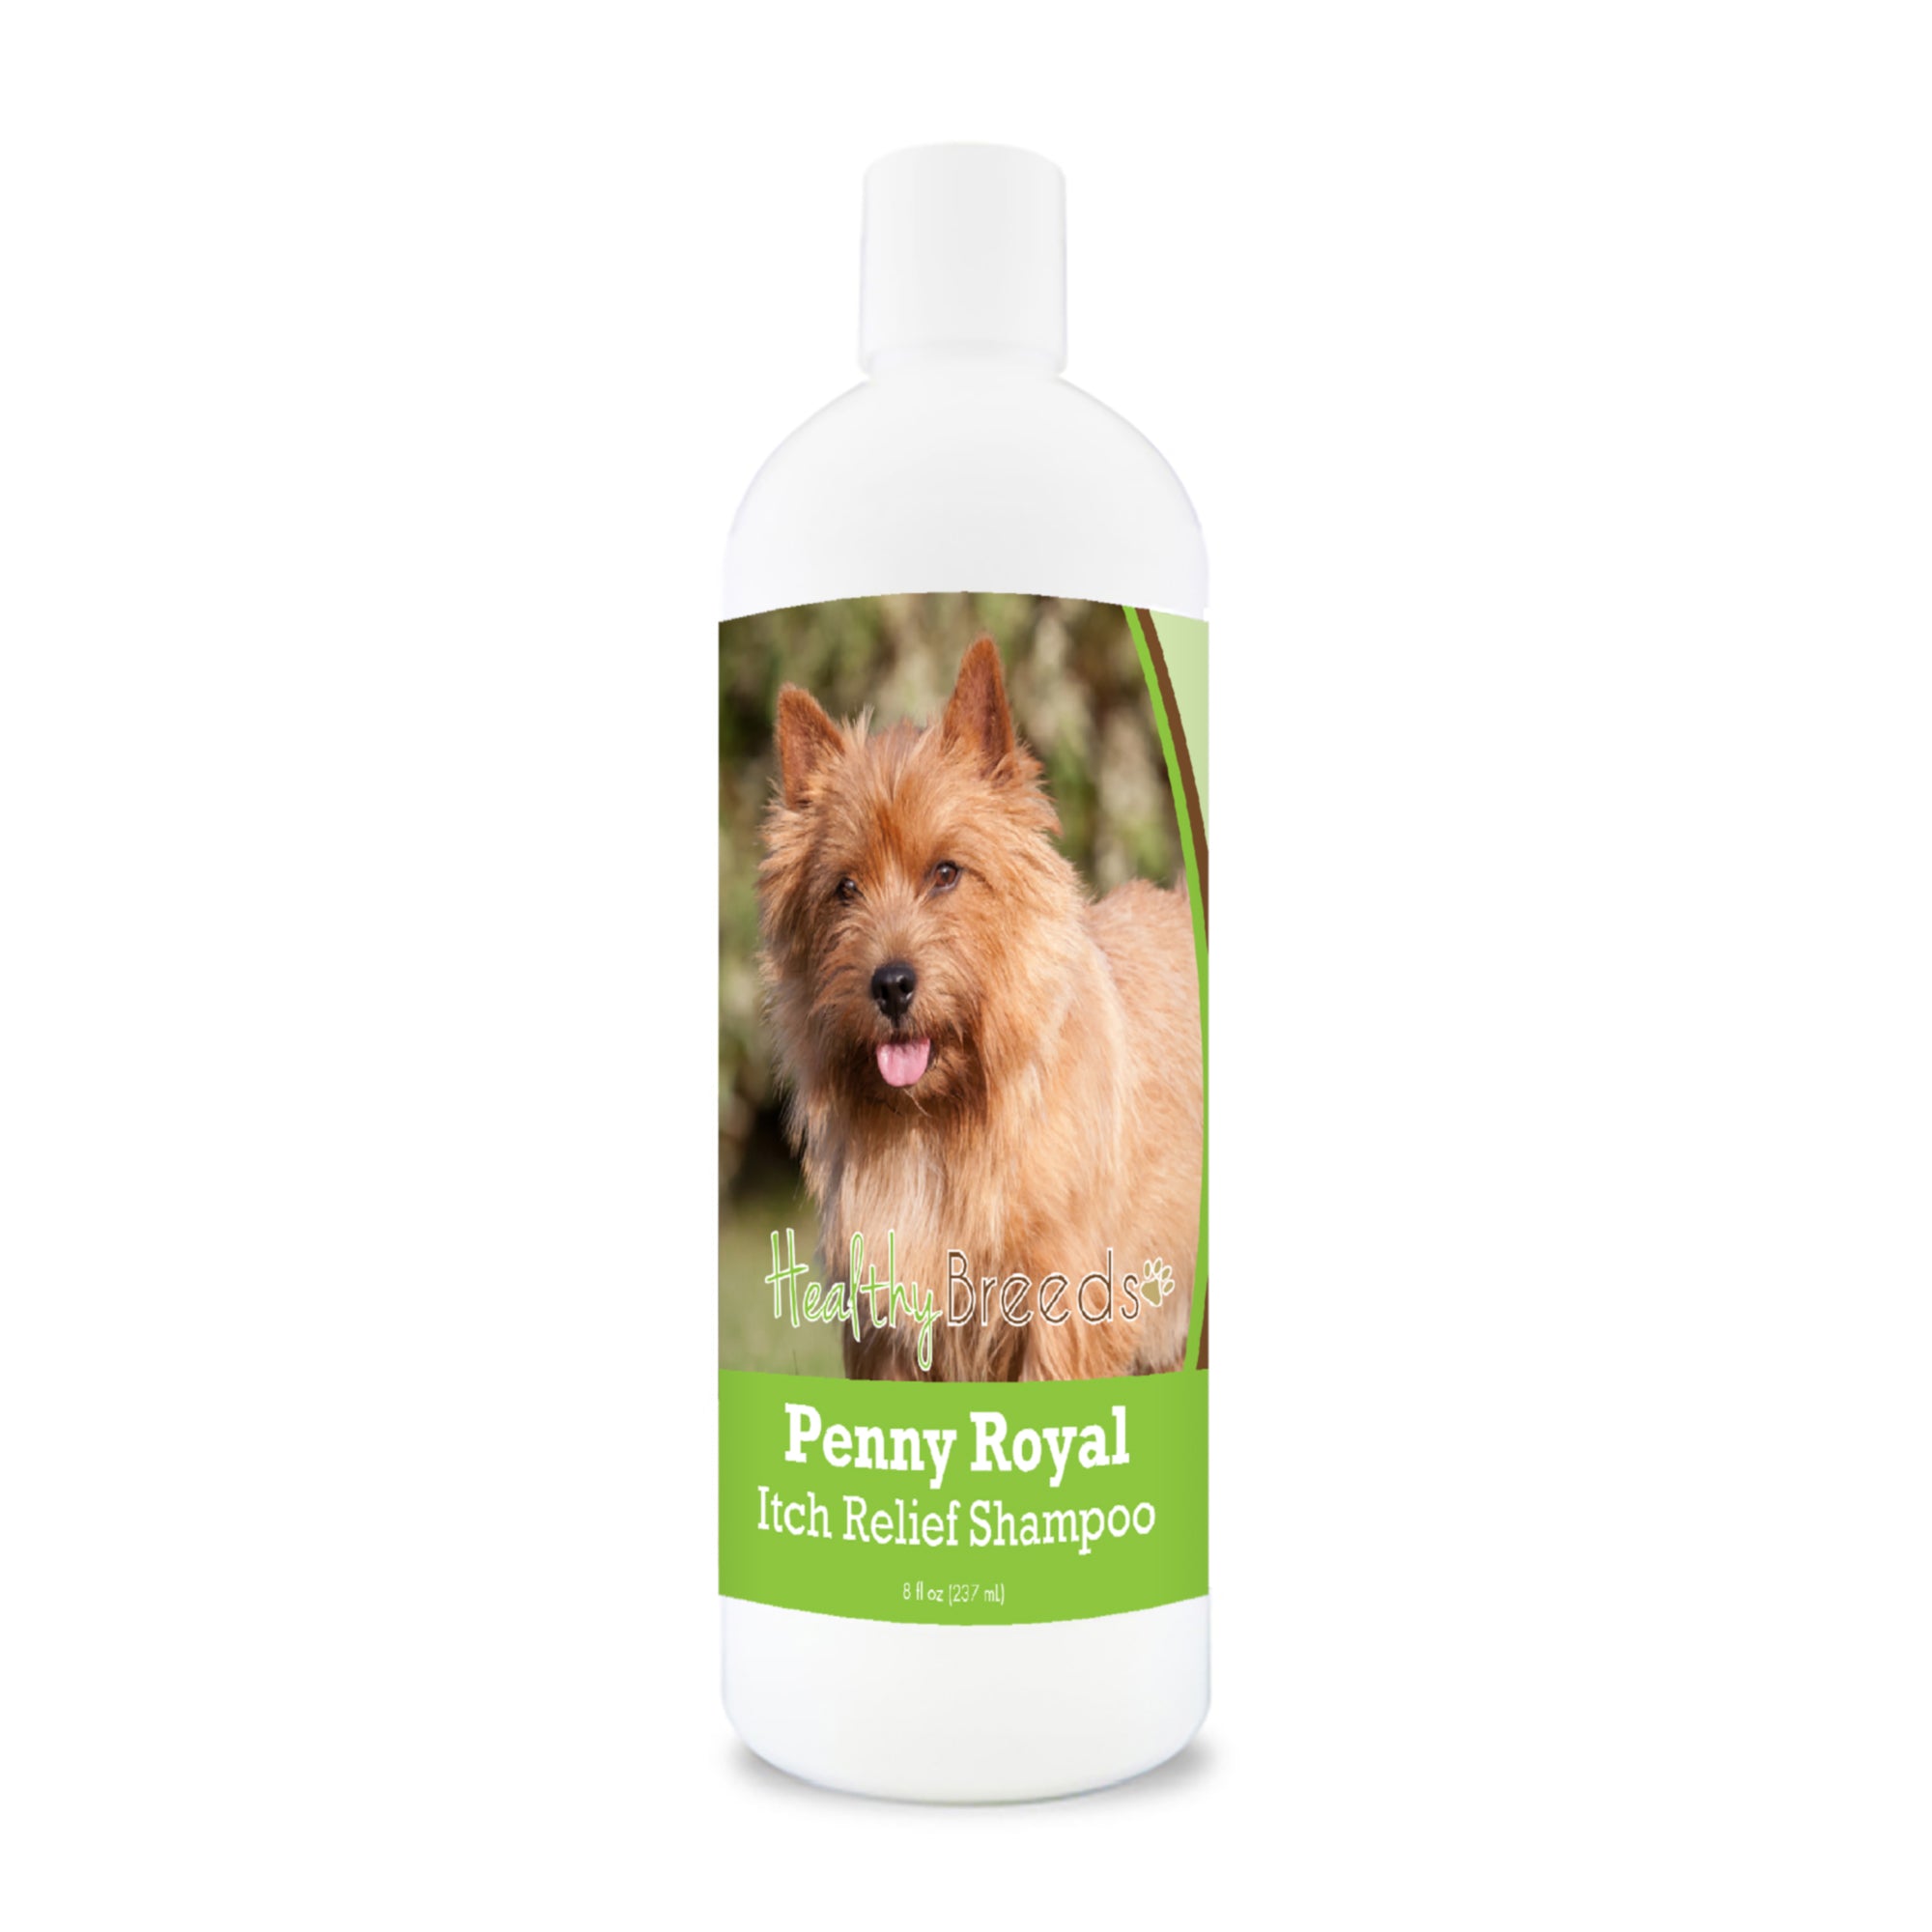 Norwich Terrier Penny Royal Itch Relief Shampoo 8 oz